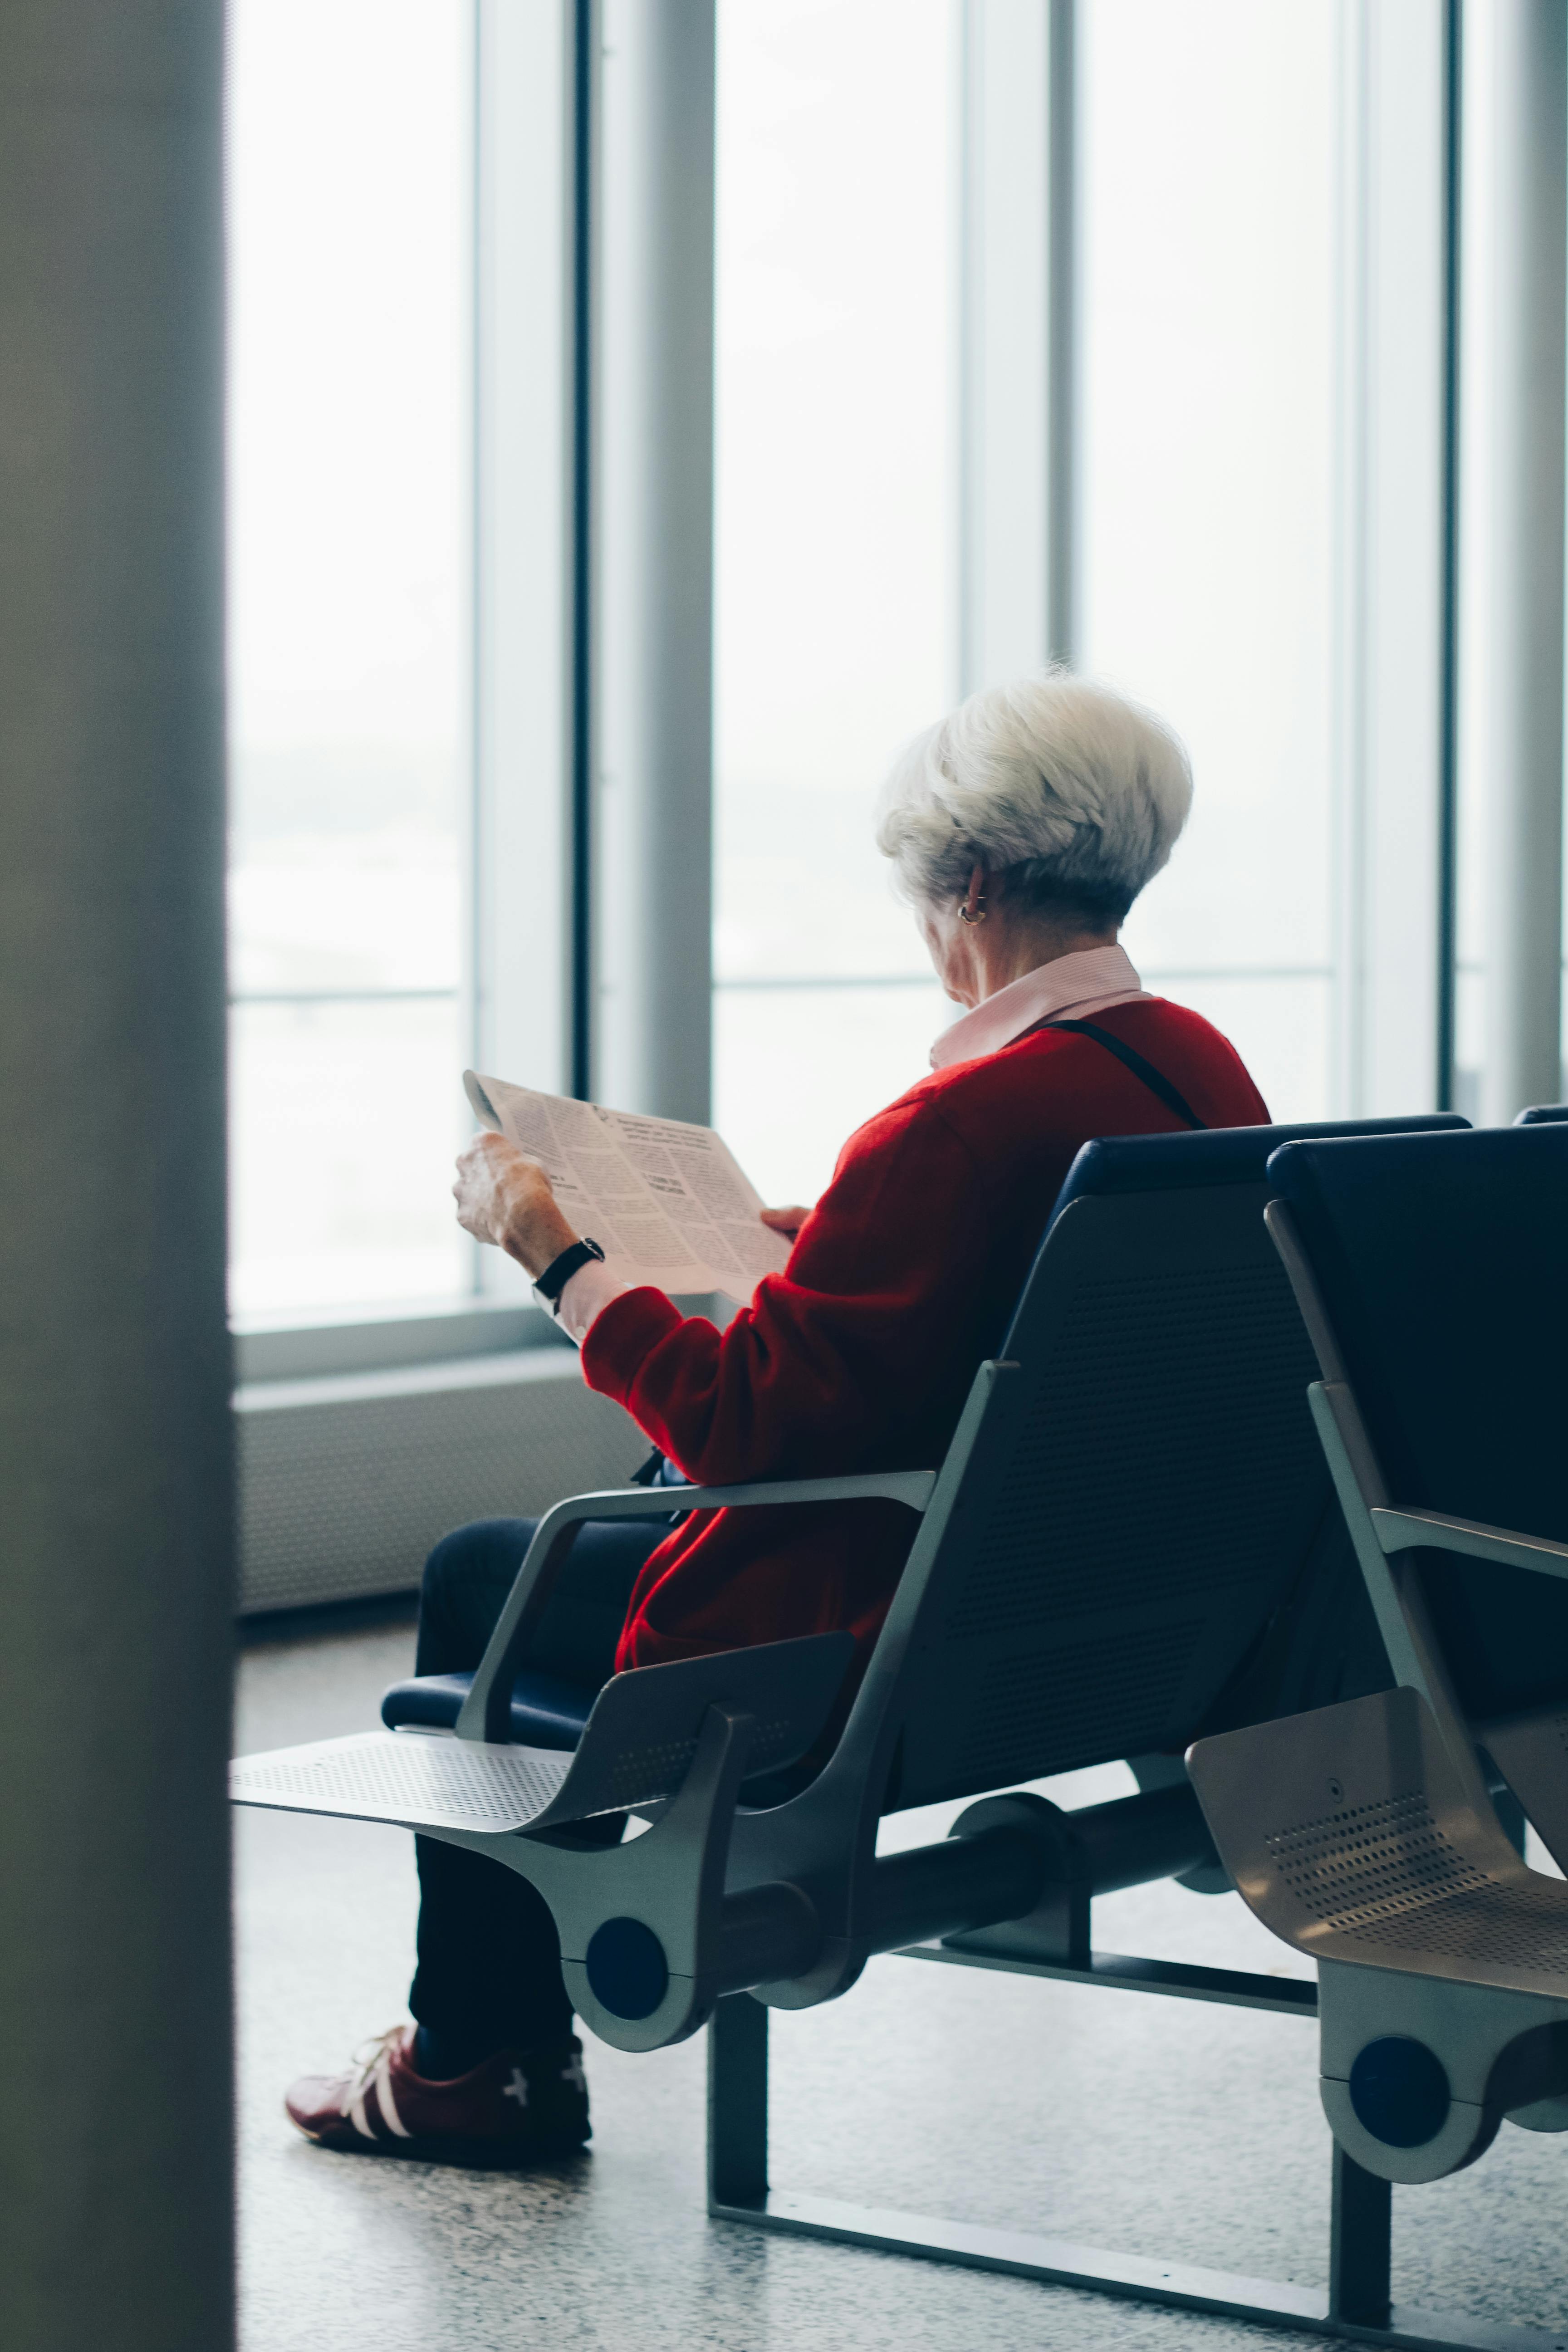 Old woman sitting on a chair while reading the newspaper. | Photo: Pexels